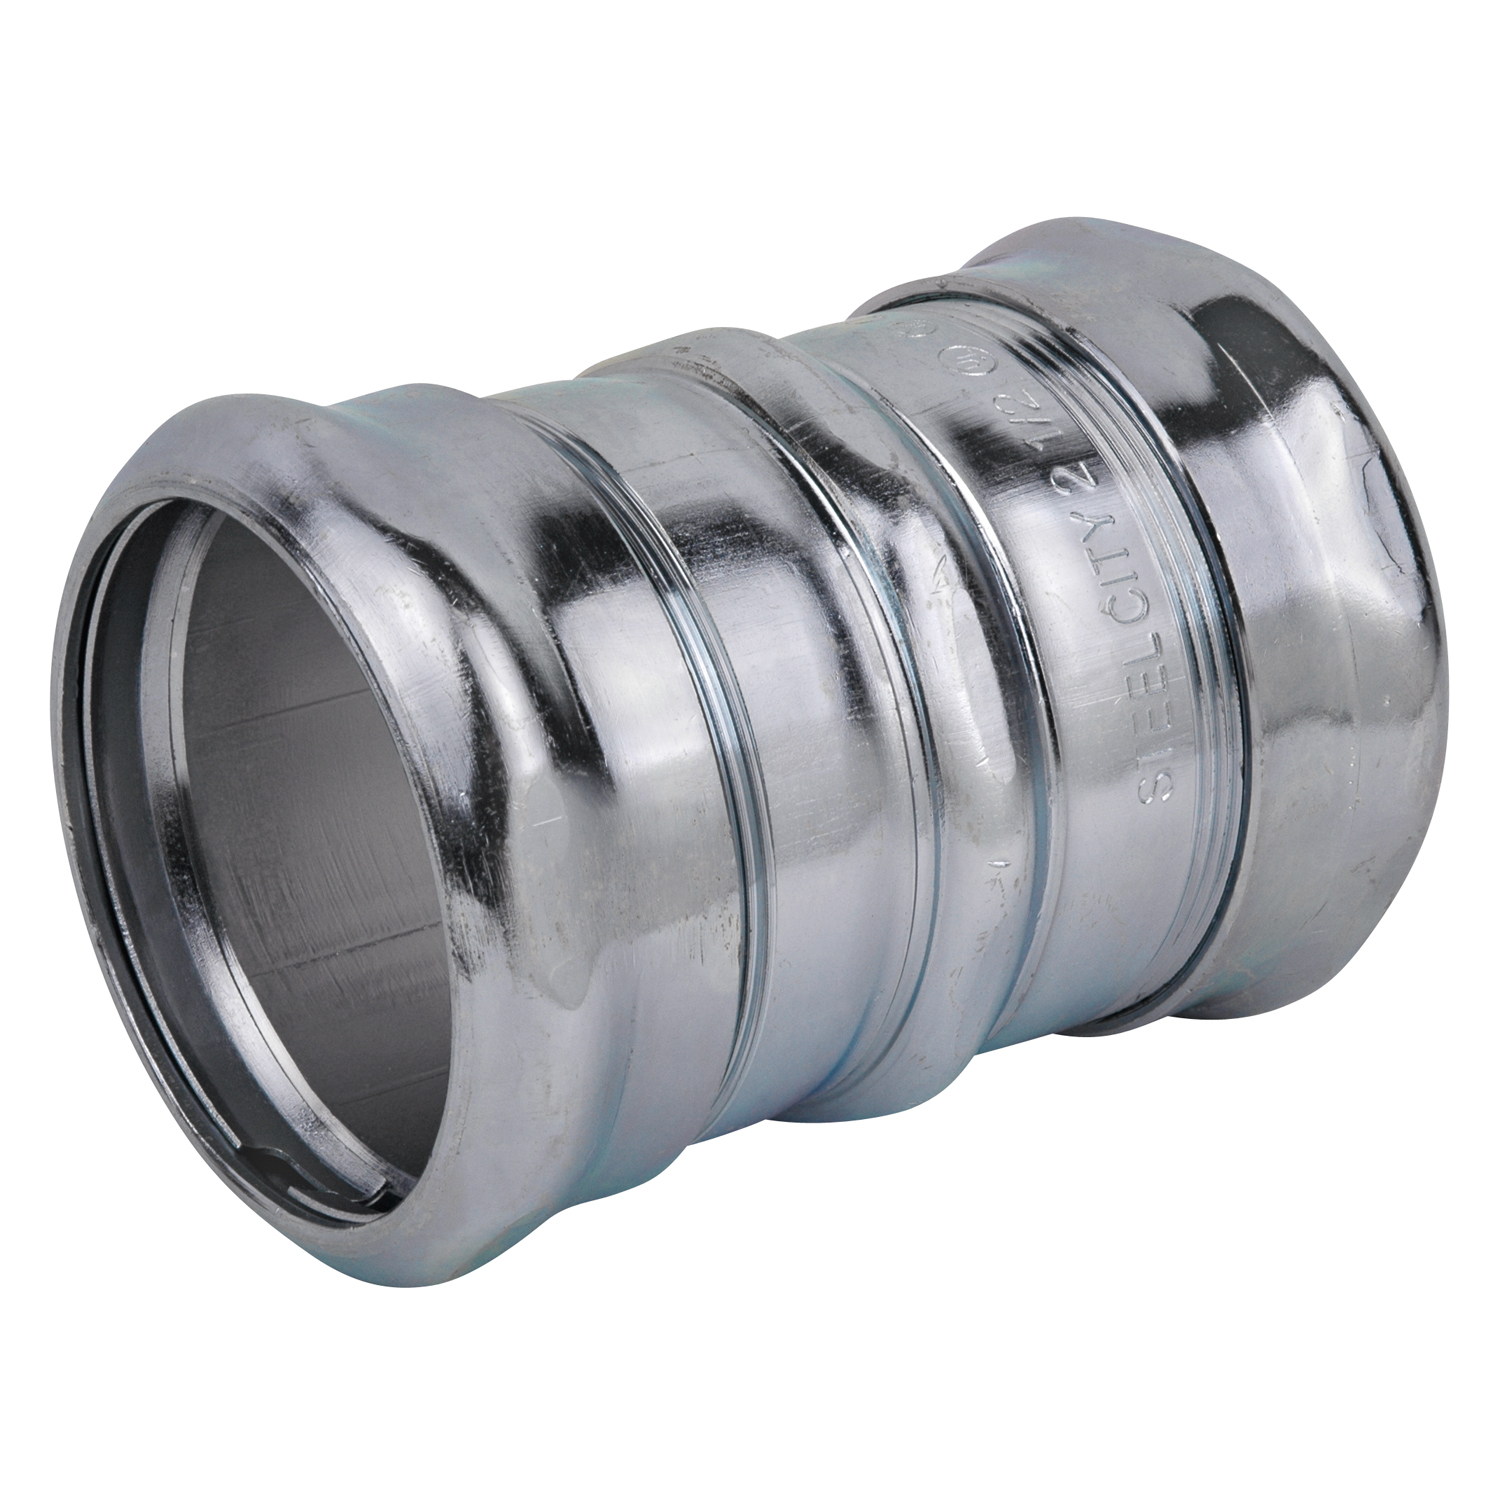 Thomas & Betts TK117A Steel City Compression Coupling